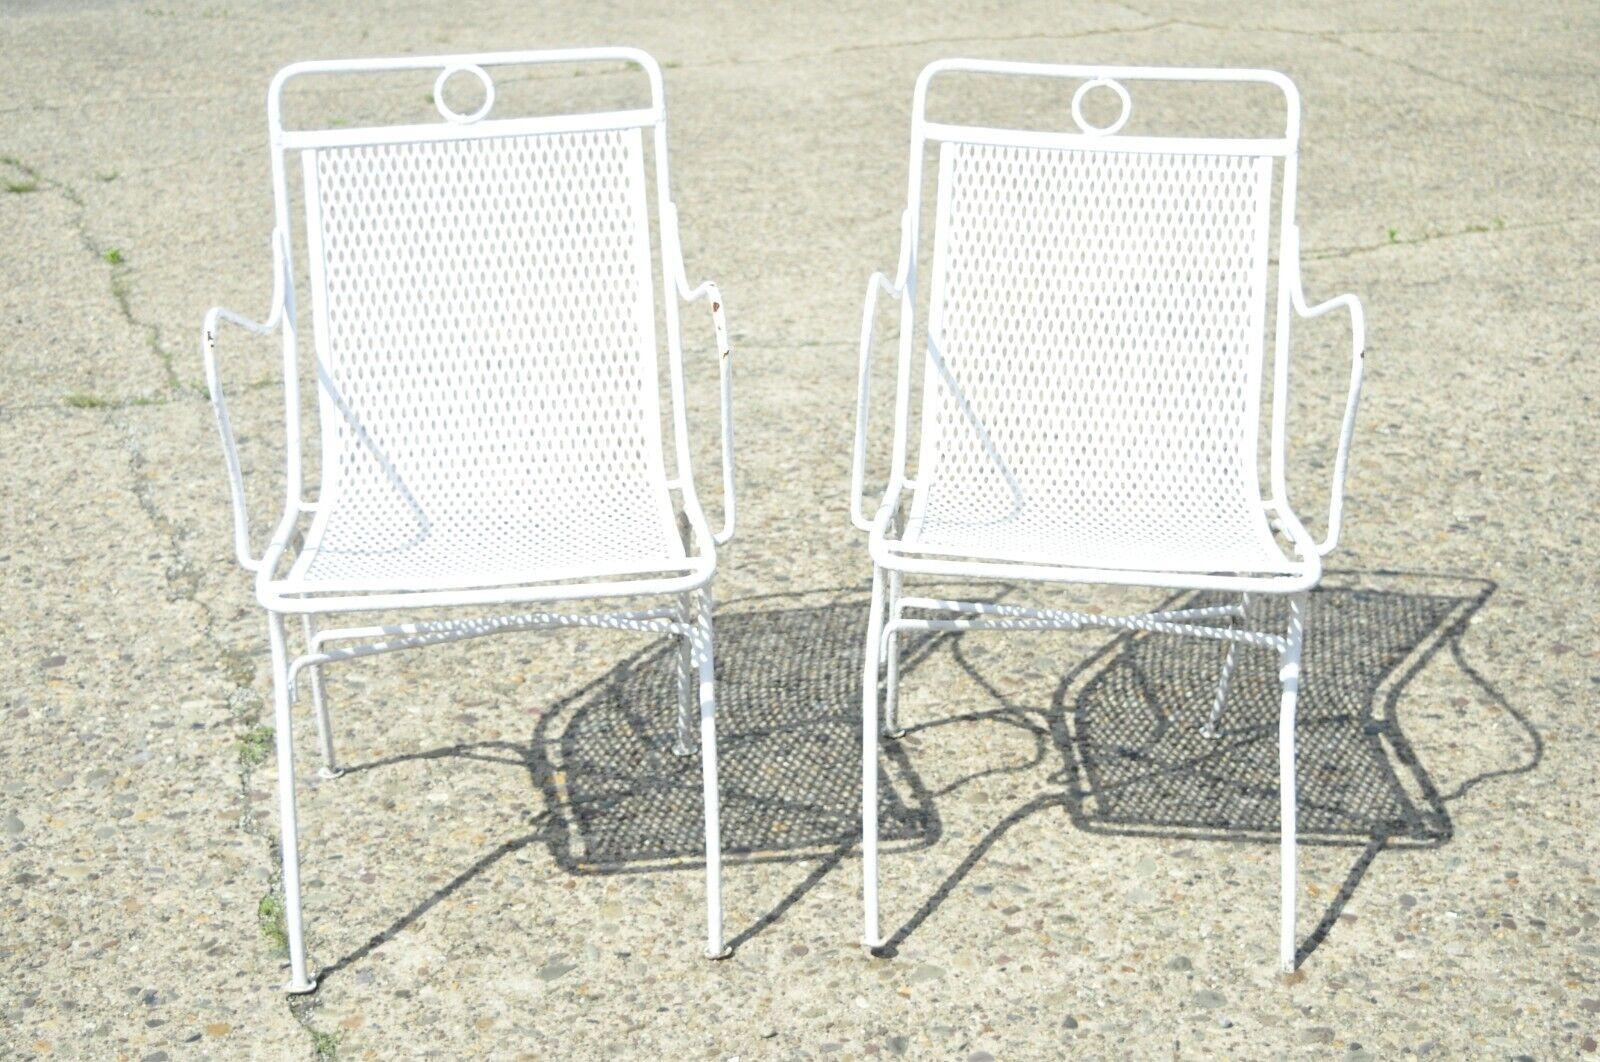 Vintage Russell Woodard wrought iron outdoor garden patio chairs - a Pair. Item features wrought iron construction, very nice vintage pair, quality American craftsmanship, sleek sculptural form. Circa Mid 20th Century.
Measurements: 33